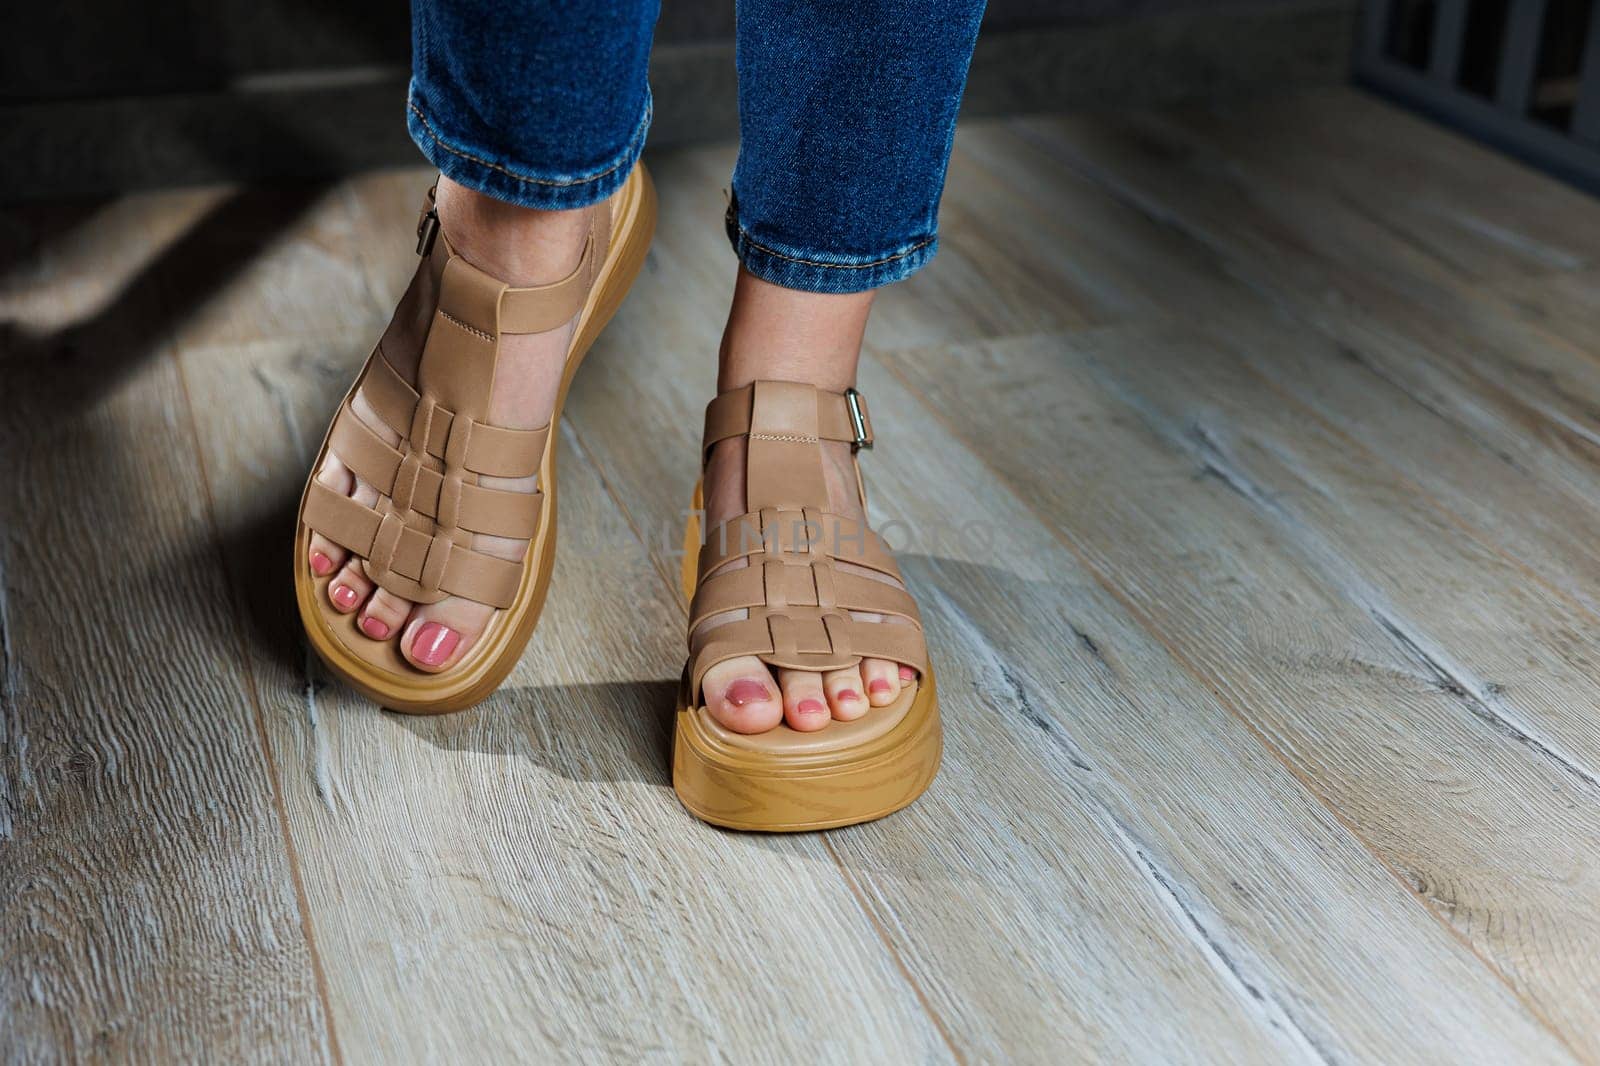 Women's sandals. Female feet close-up in casual brown sandals. Collection of summer women's sandals by Dmitrytph